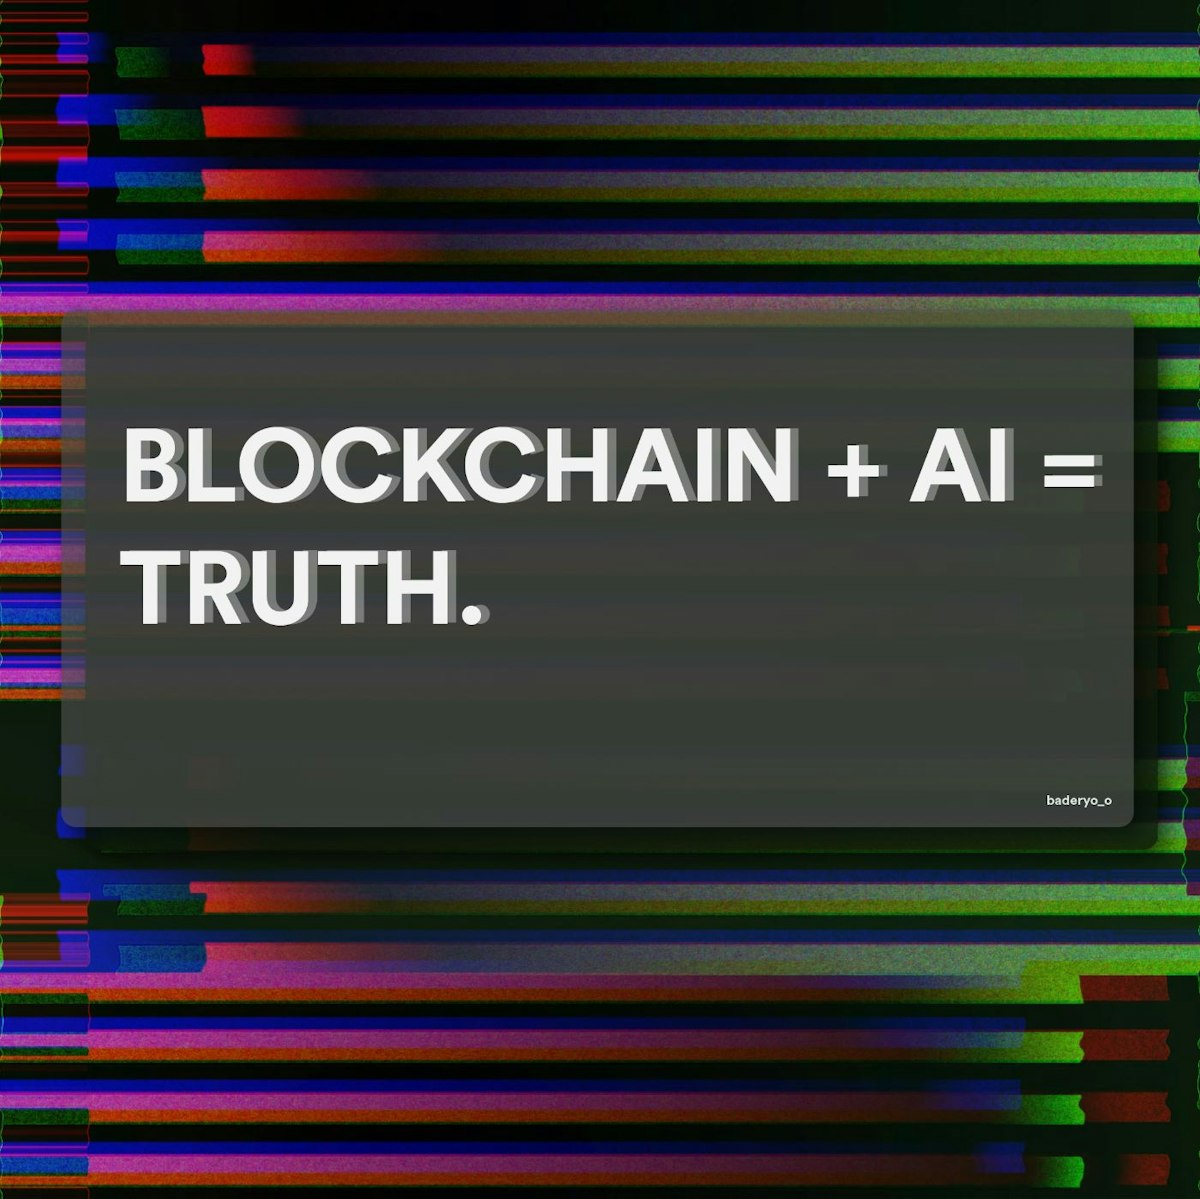 featured image - Blockchain as the Ultimate Truth Machine for GPT-based AI (ChatGPT)